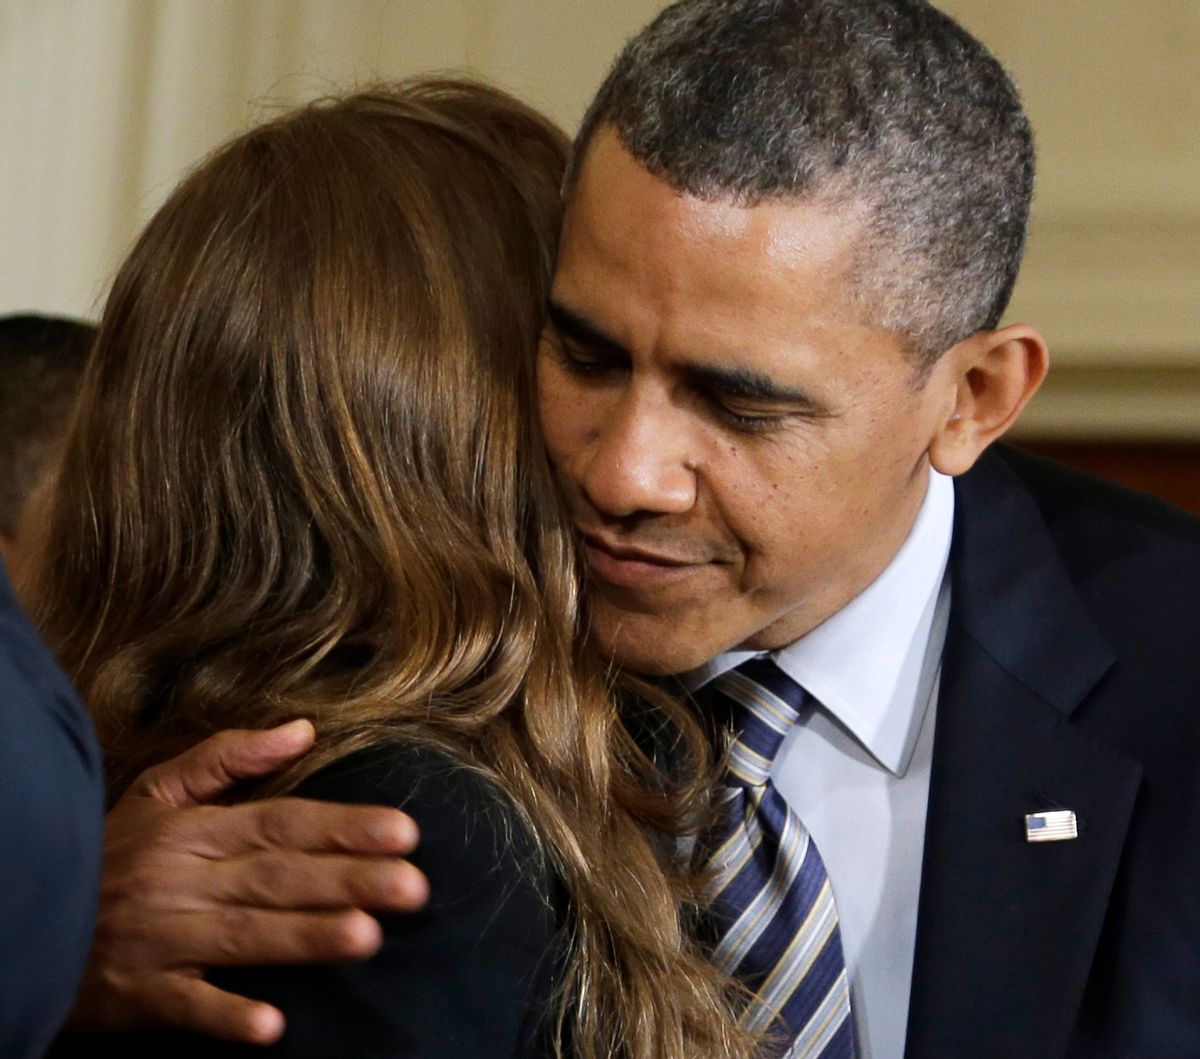 President Barack Obama hugs Katerina Rodgaard, a Maryland dance instructor who knew one of the victims of the Virginia Tech shootings, after she introduced him in the East Room of the White House in Washington, Thursday, March 28, 2013.        (AP/Carolyn Kaster)